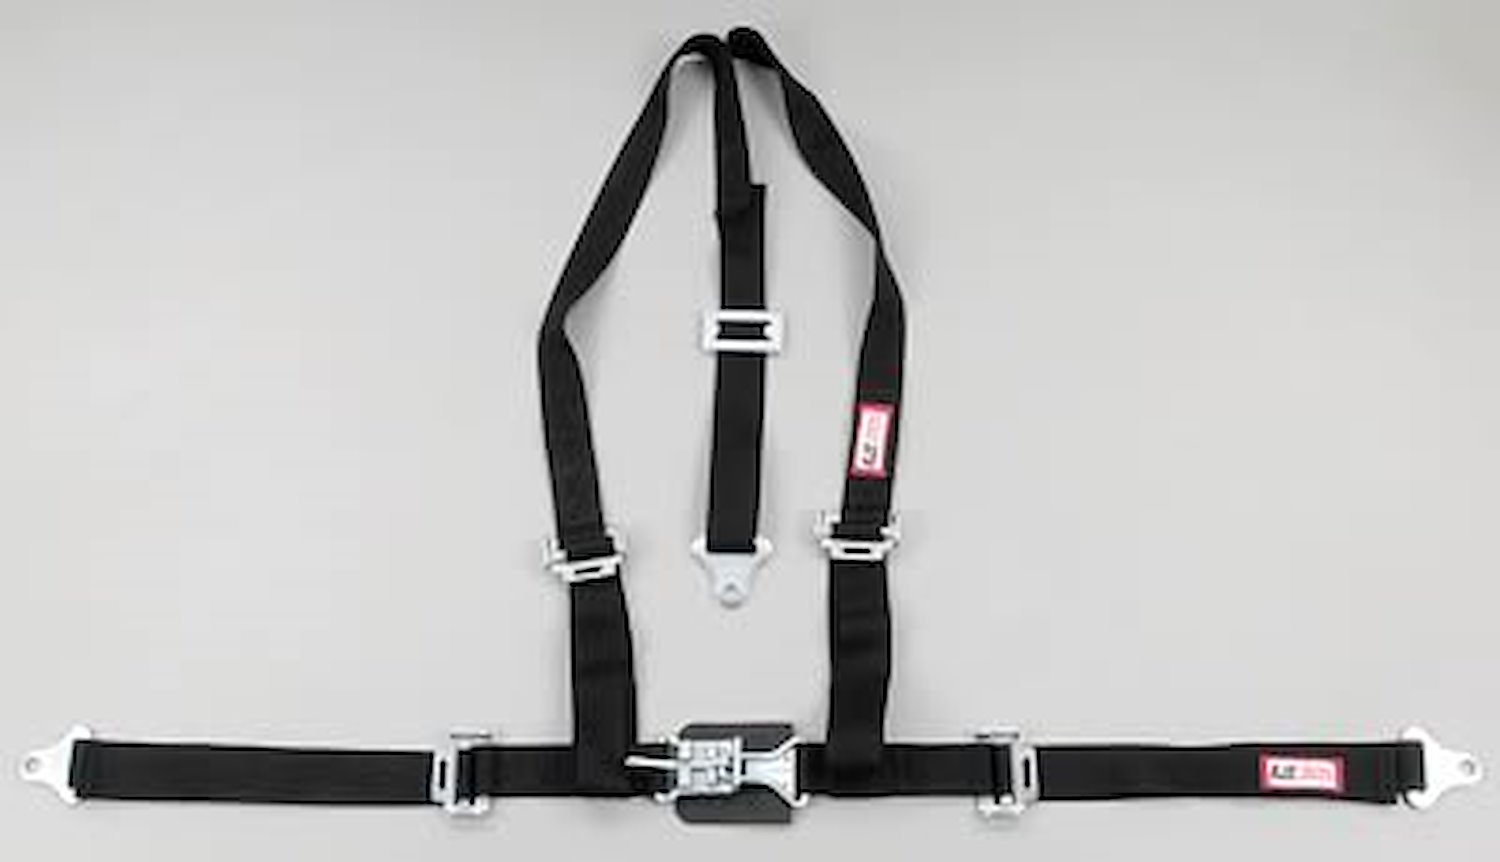 NON-SFI L&L HARNESS 3 PULL UP Lap Belt SNAP SEWN IN 2 S.H. Individual FLOOR Mount w/STERNUM STRAP WRAP/SNAP BLACK